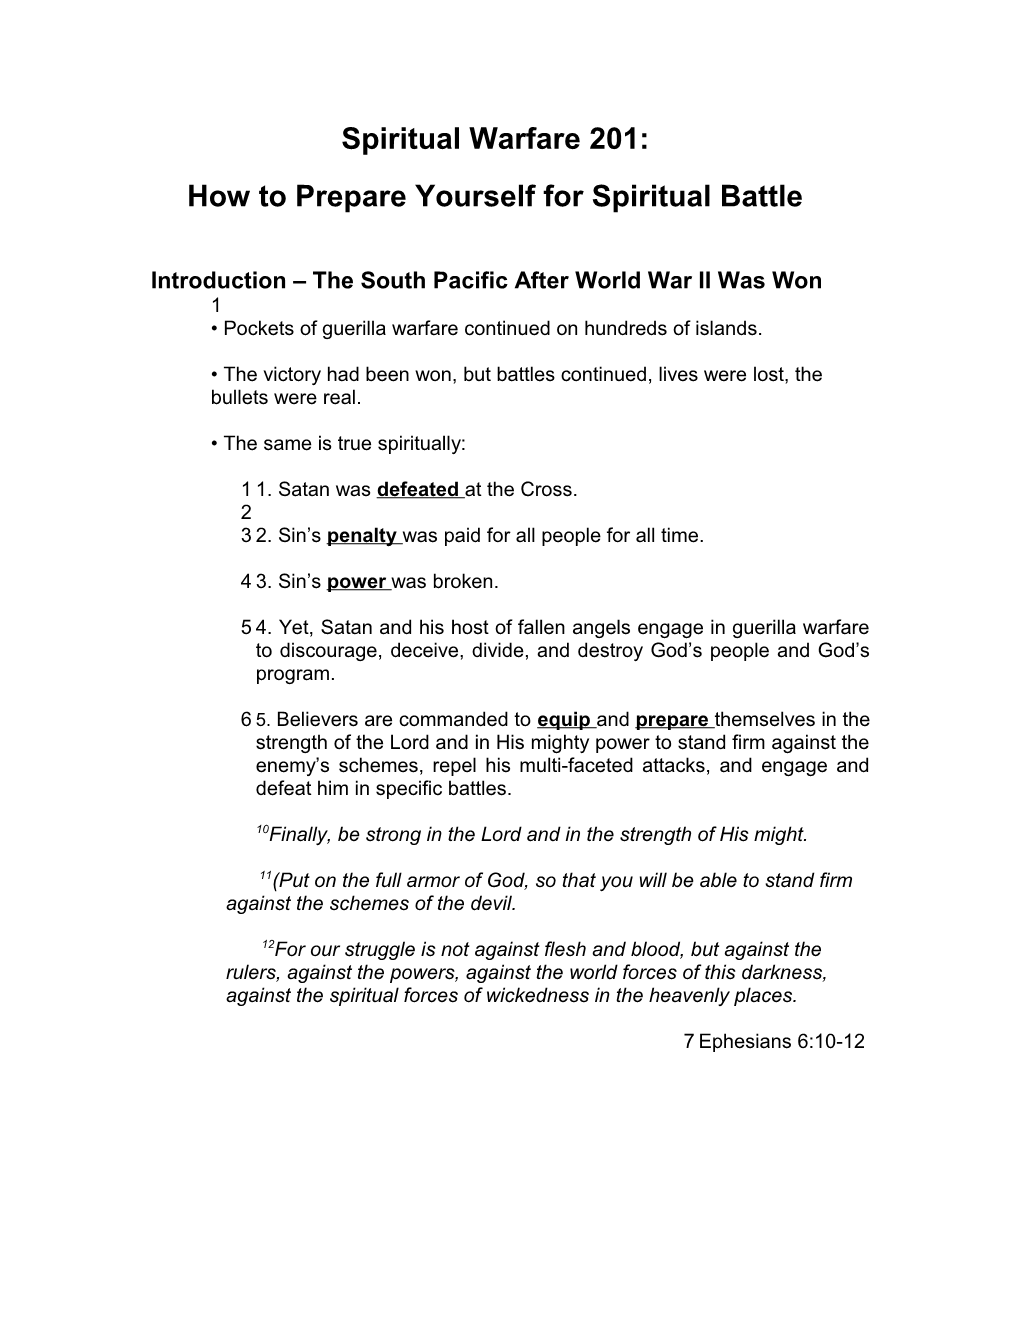 How to Prepare Yourself for Spiritual Battle